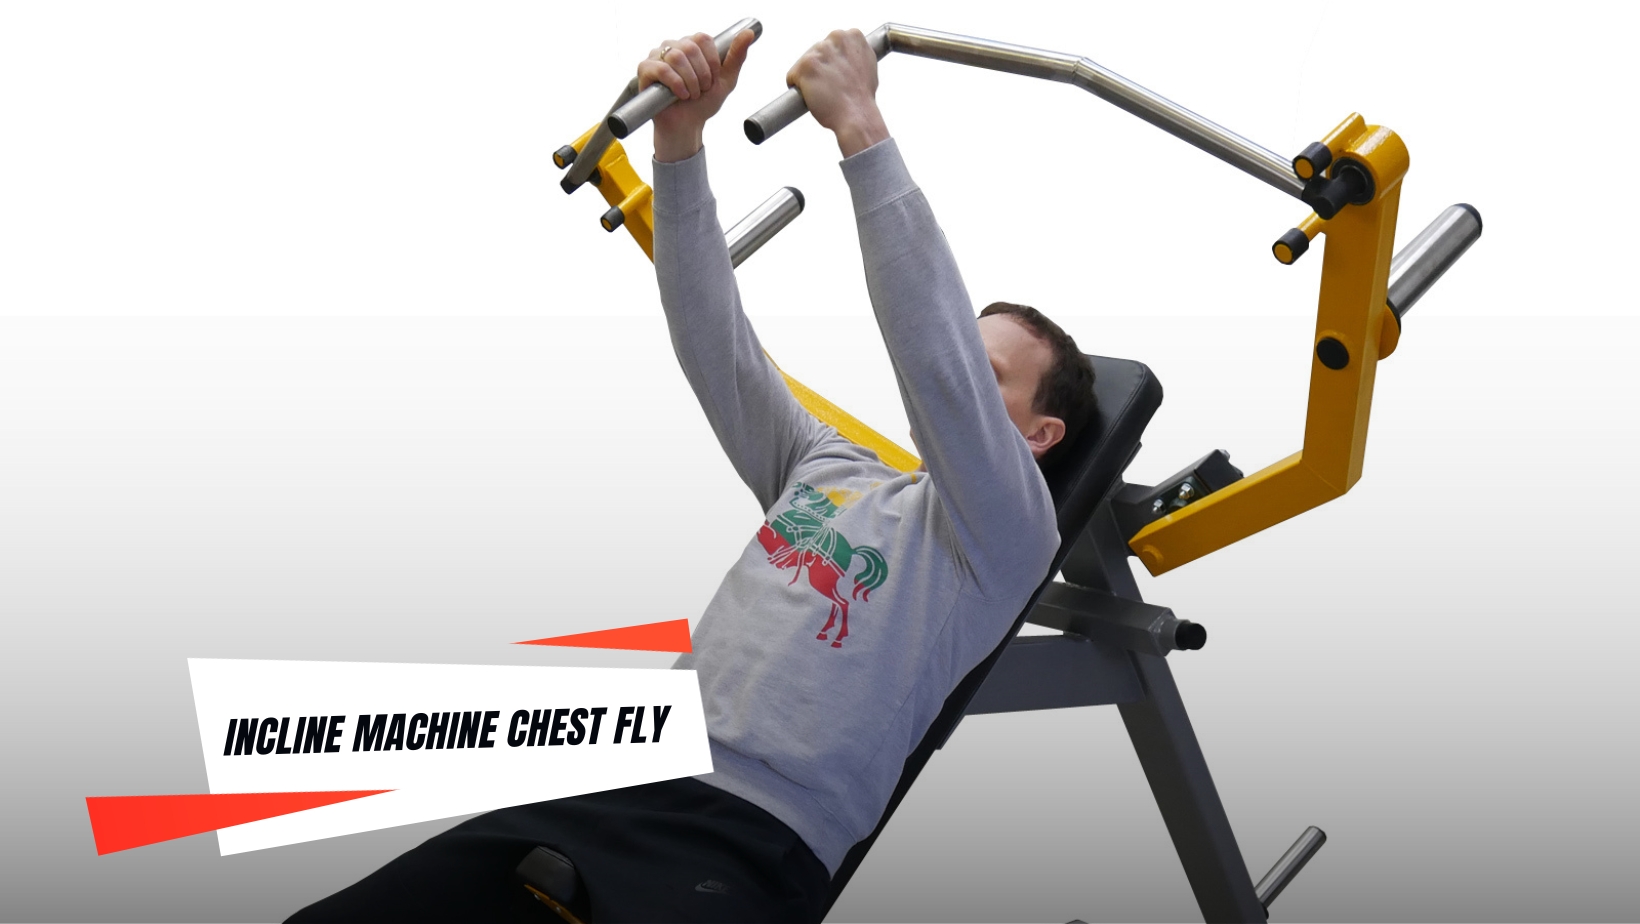 Incline Machine Chest Fly